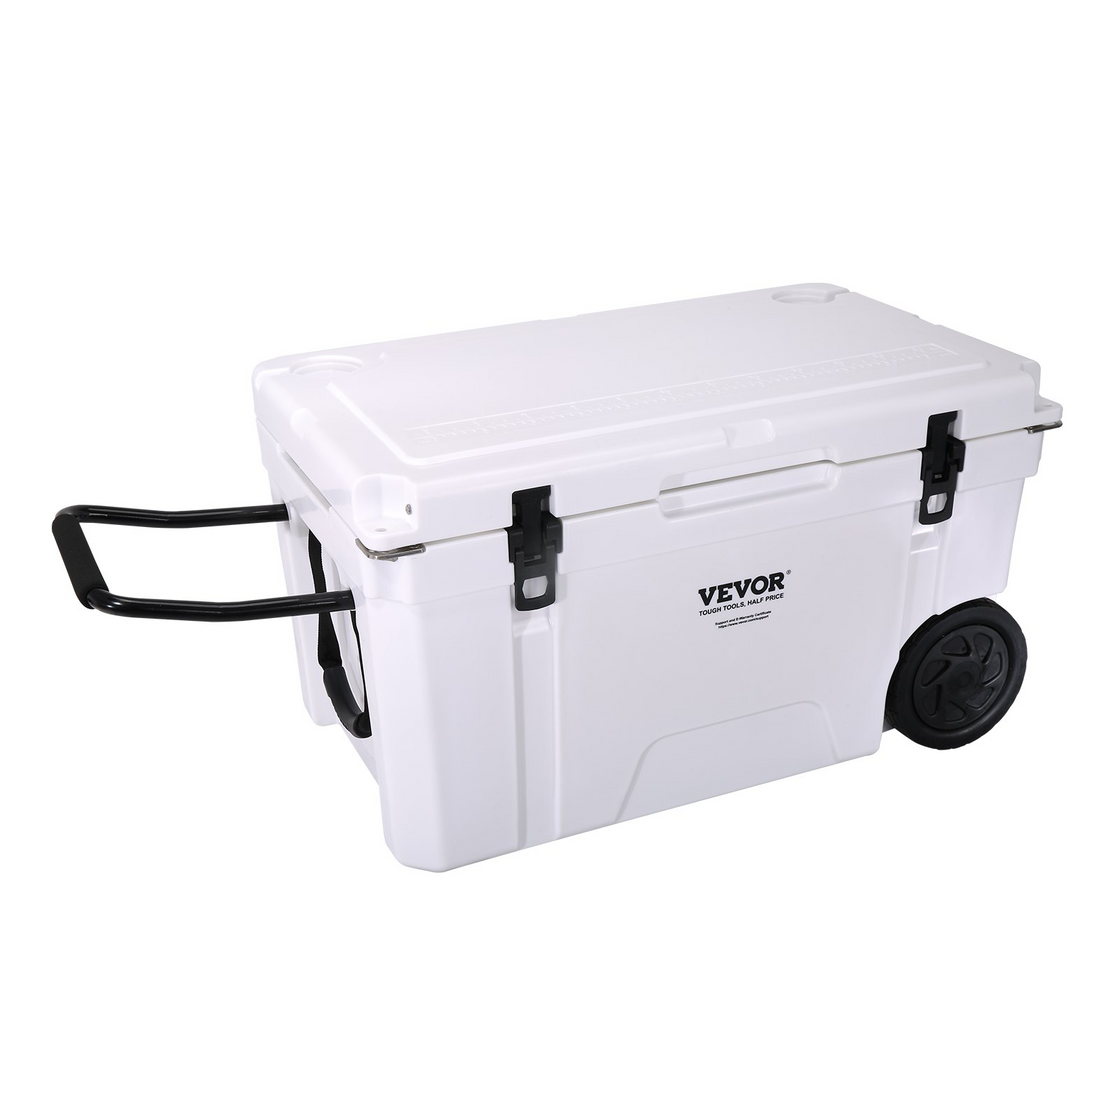 VEVOR Insulated Portable Cooler with Wheels - 65 qt - Keeps Ice for 6 Days